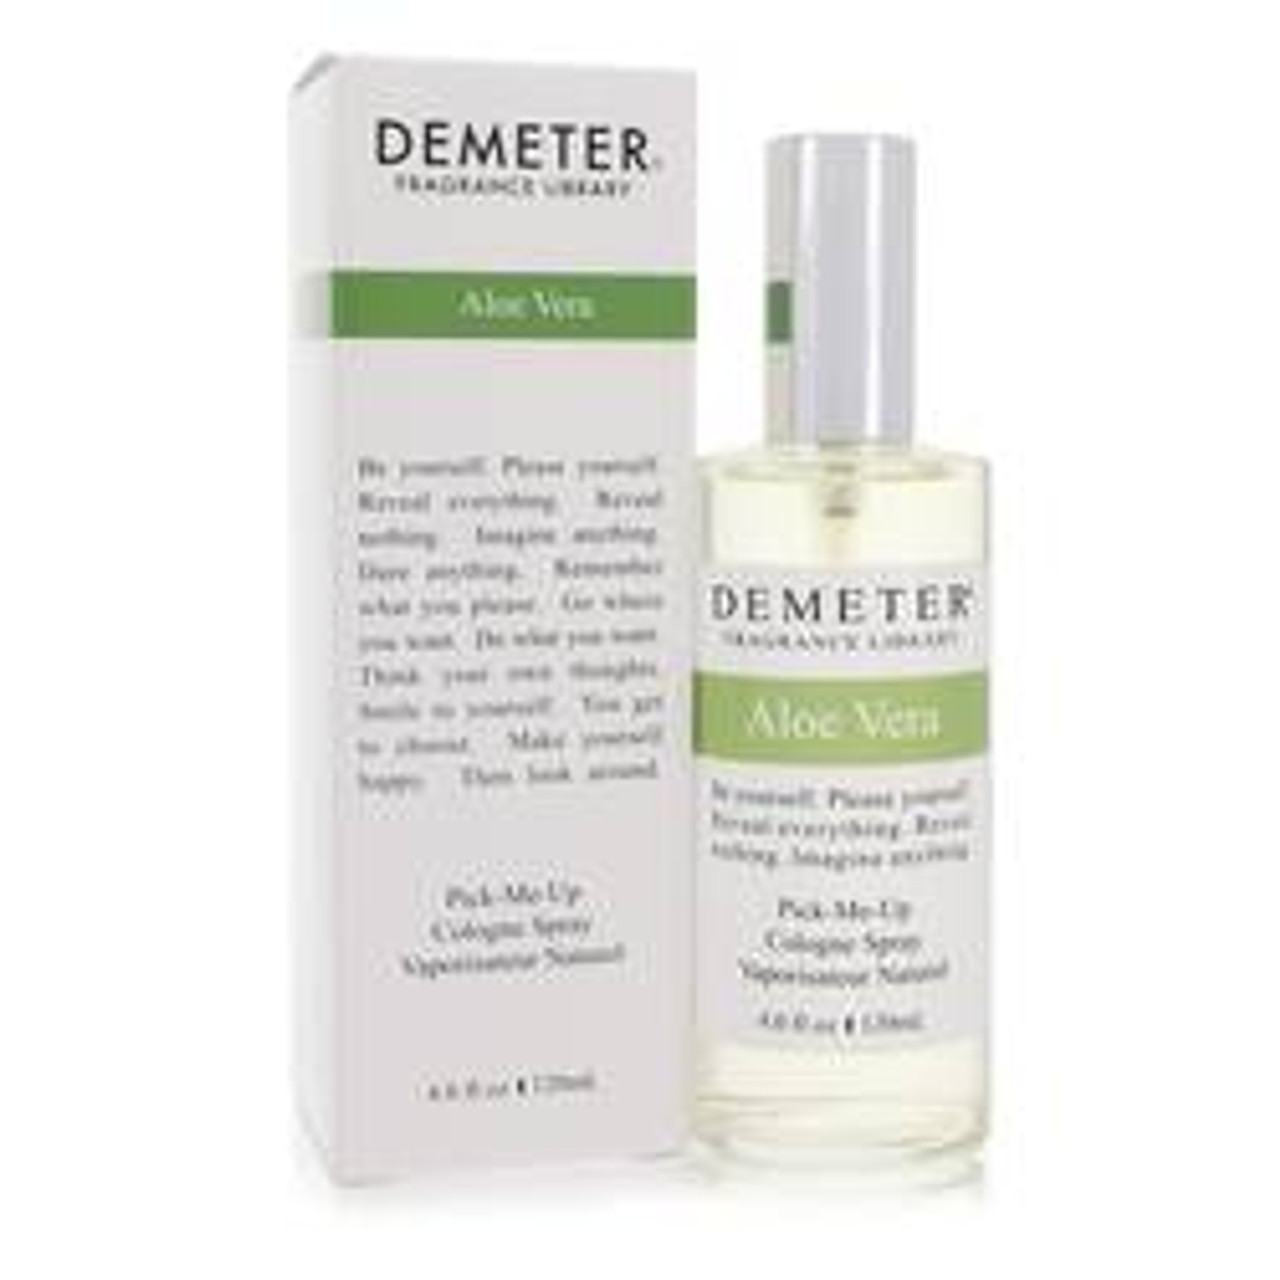 Demeter Aloe Vera Perfume By Demeter Cologne Spray 4 oz for Women - [From 79.50 - Choose pk Qty ] - *Ships from Miami